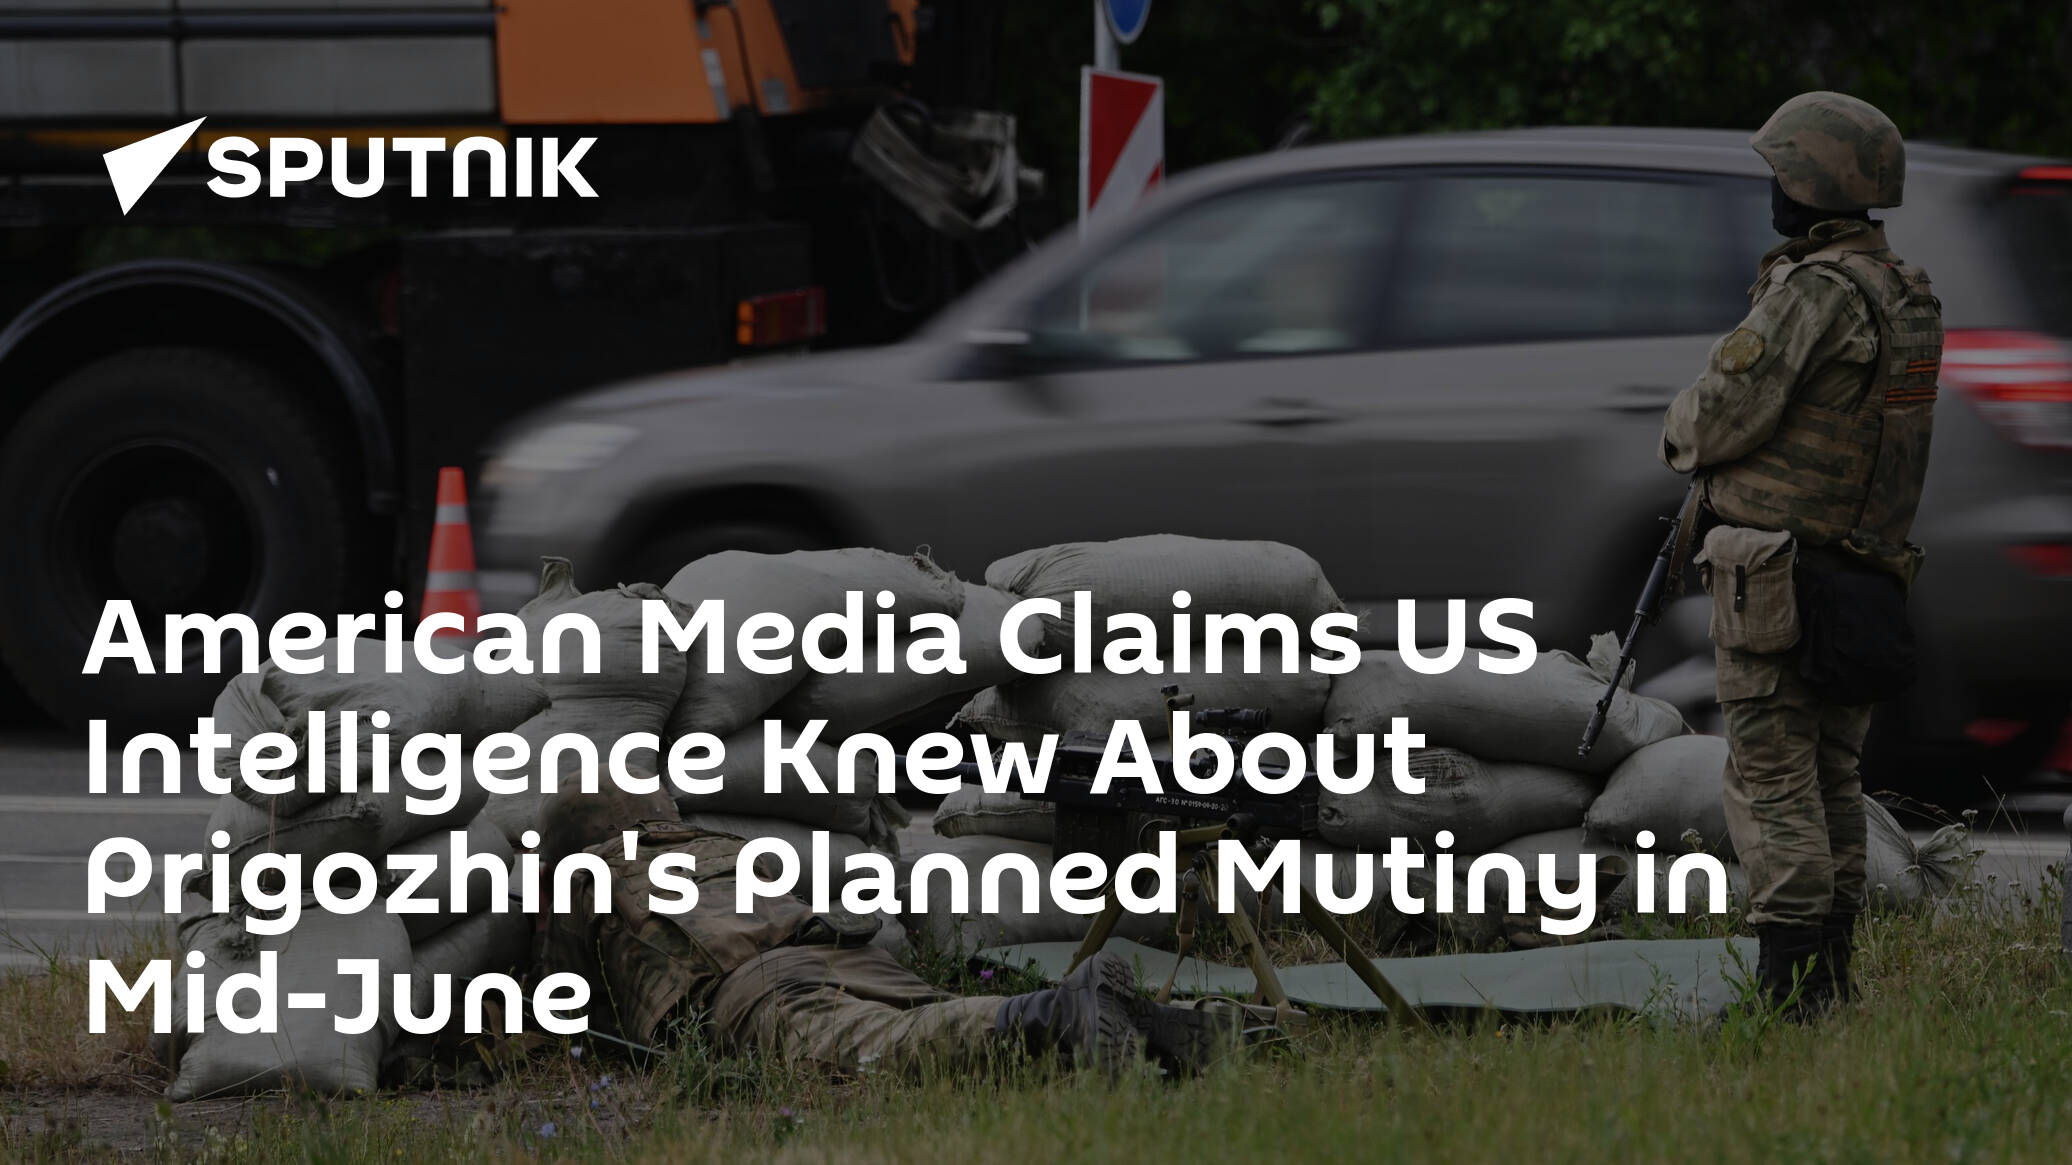 American Media Claims US Intelligence Knew About Prigozhin's Planned Mutiny in Mid-June